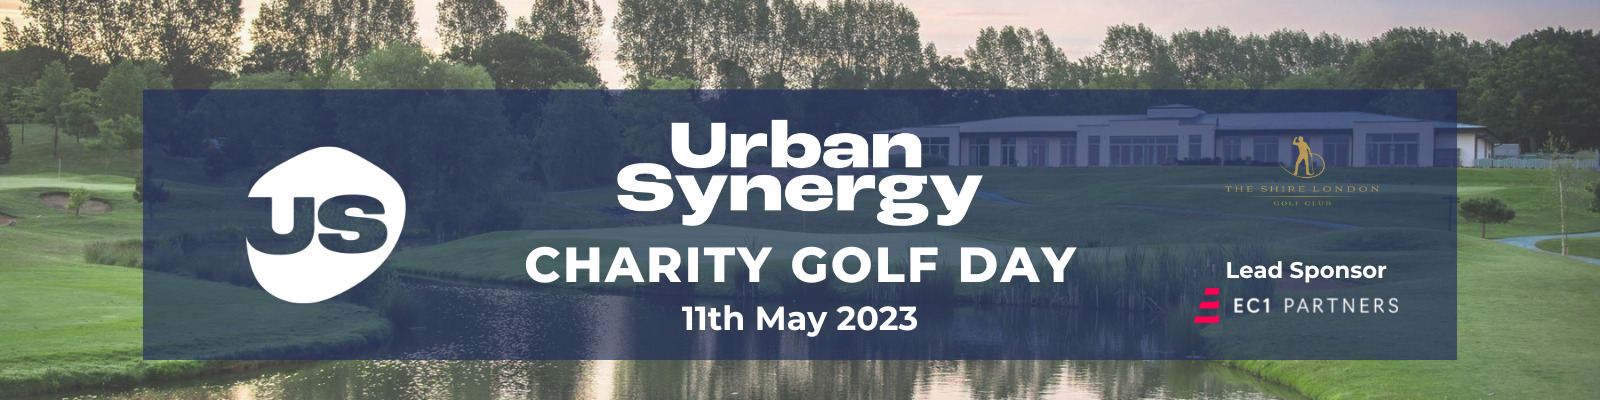 Urban Synergy Charity Golf Day 11th May 2023